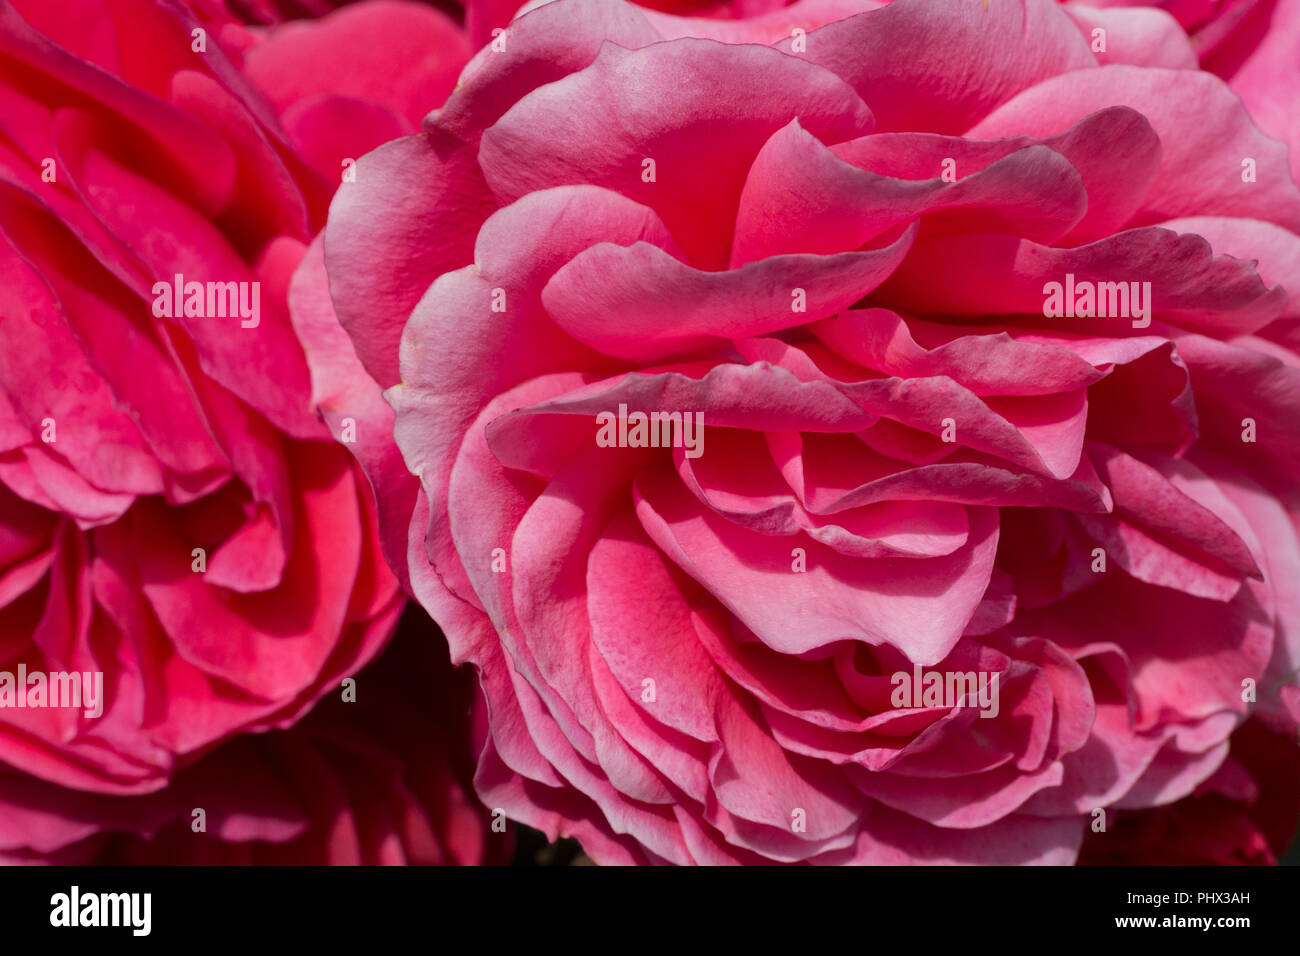 close up image of a pink rose flower Stock Photo